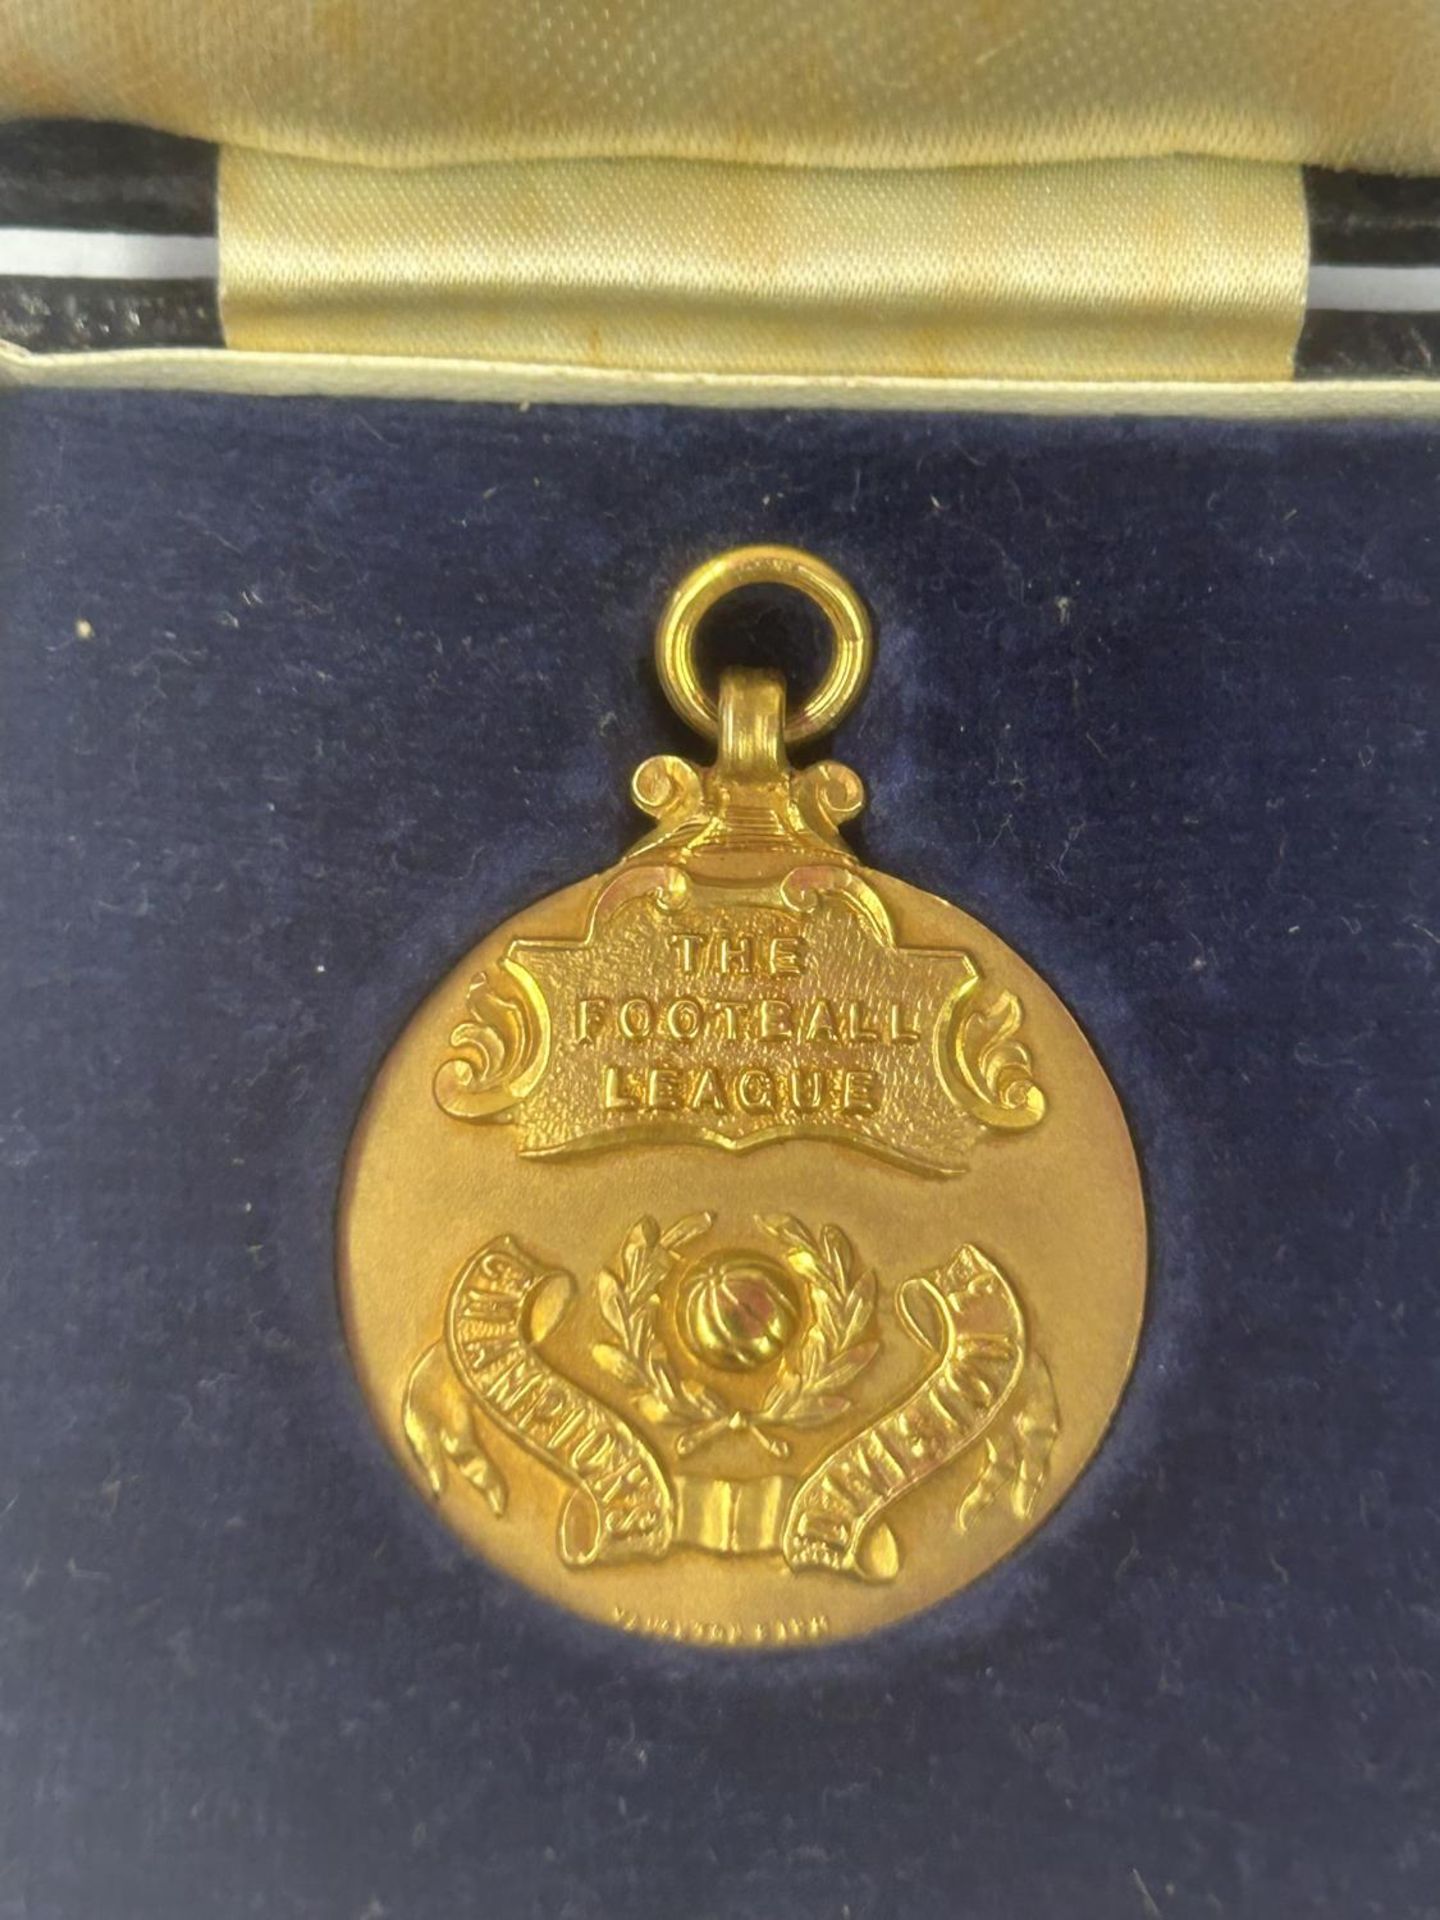 A HALLMARKED 9 CARAT GOLD FOOTBALL LEAGUE DIVISION 3 LEAGUE WINNERS MEDAL 1967-1968 SEASON, BY - Image 2 of 5